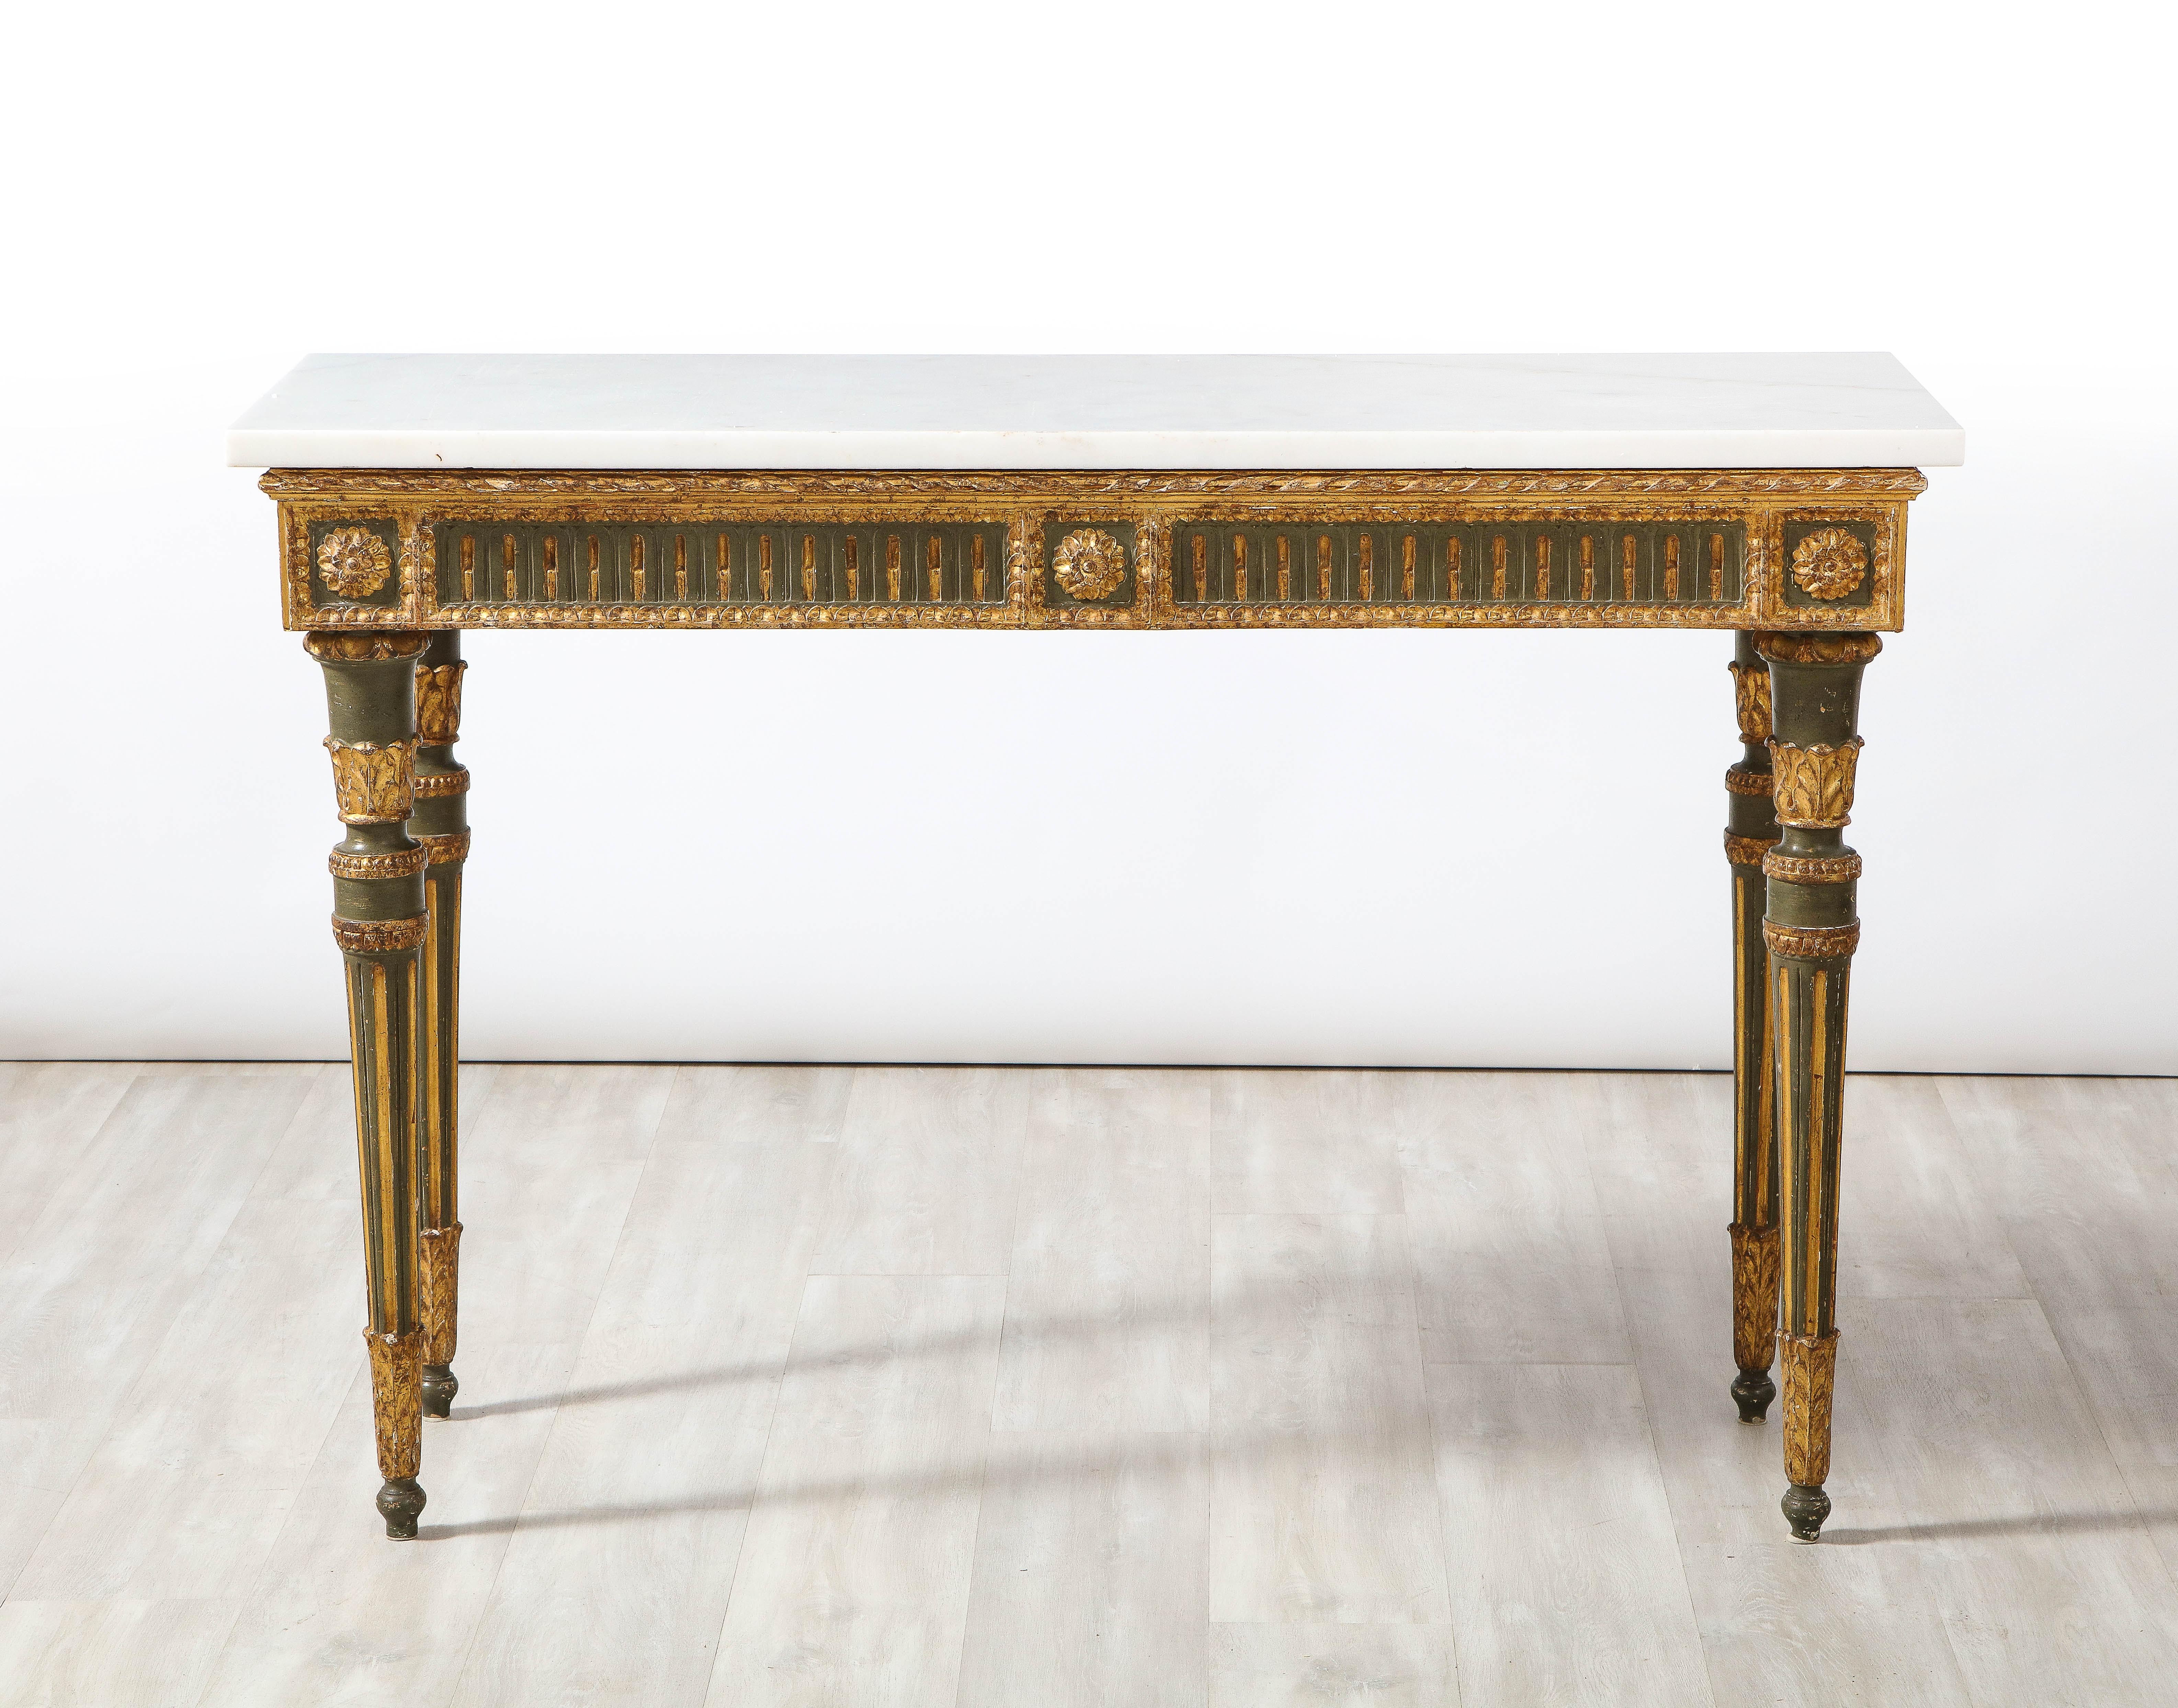 A pair of exquisite and elegant Florentine 18th century Louis XVI period carved, painted and gilded wood Neoclassical console tables, with Carrara white marble tops. The rectangular frieze is decorated on the front and sides with carved and gilded